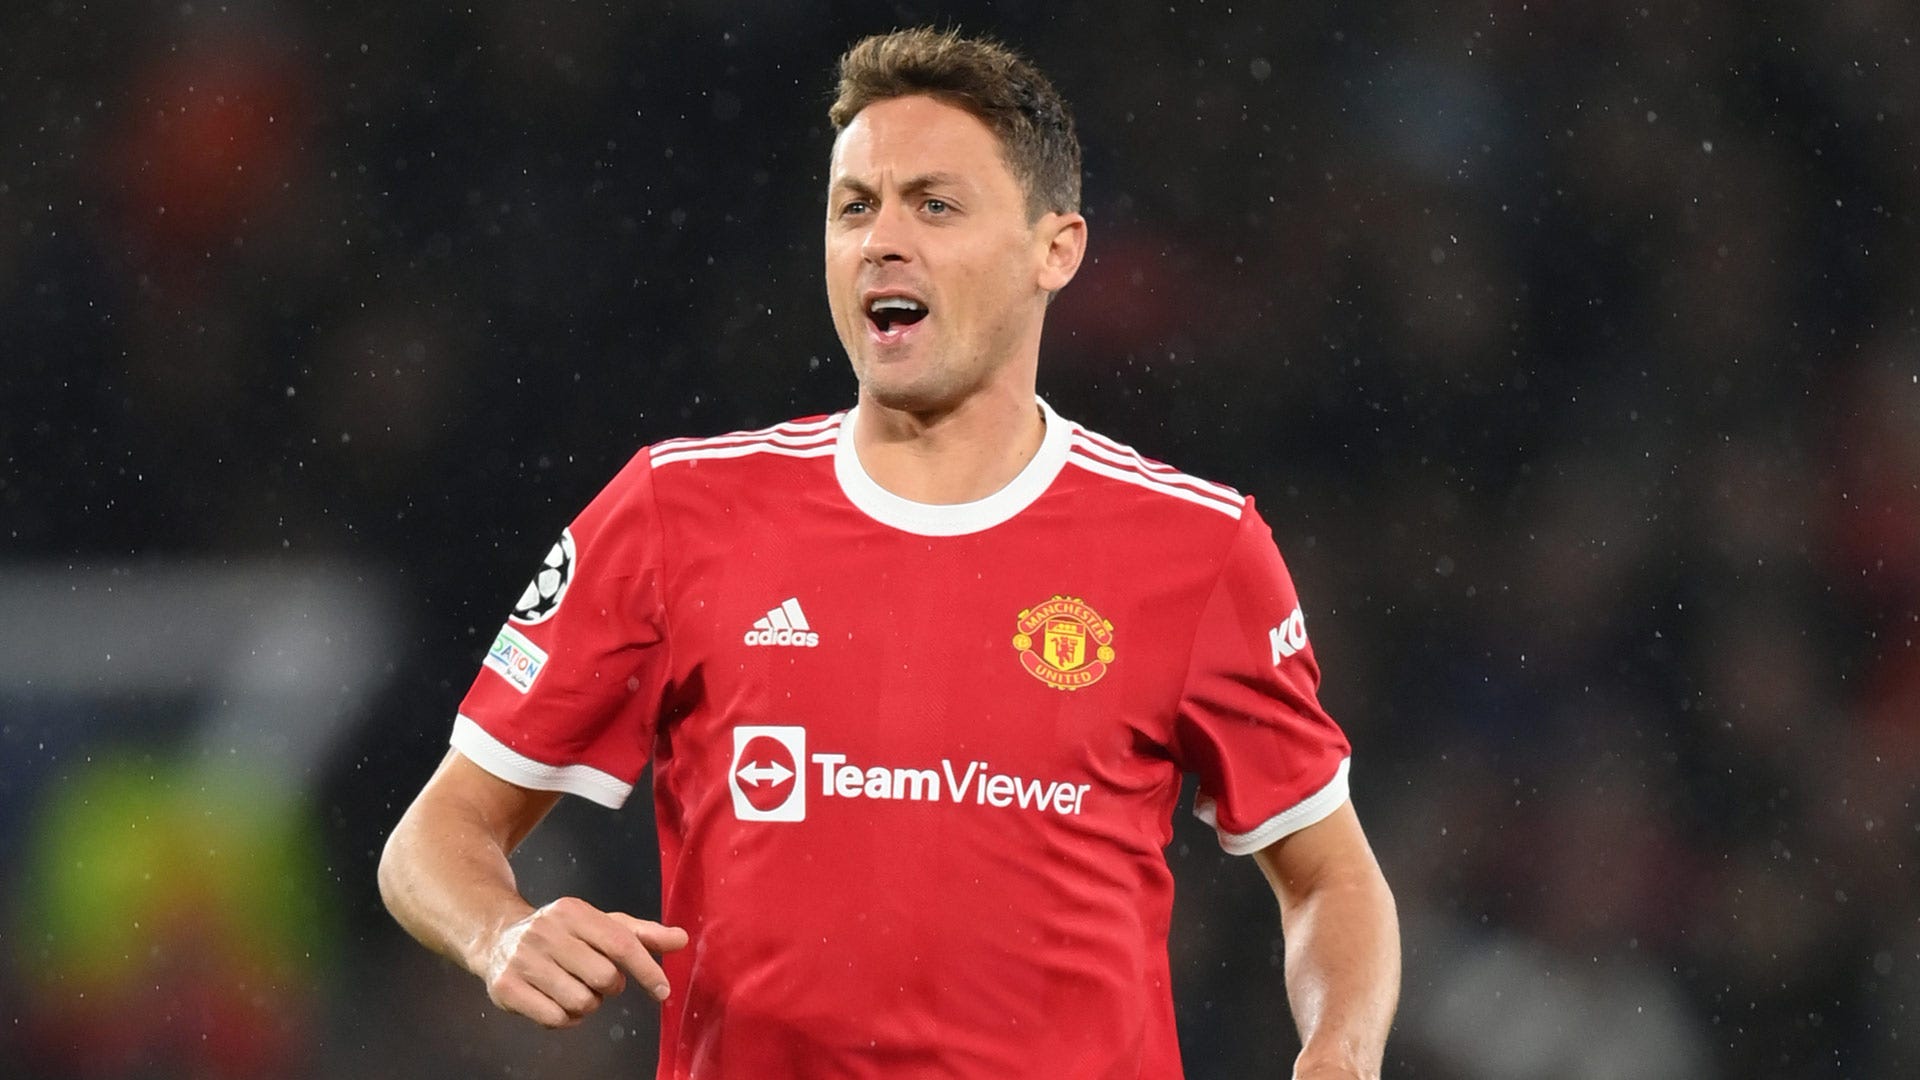 Departing Matic sends message to Man Utd fans telling them players are 'doing their best' and to 'keep supporting' | Goal.com India